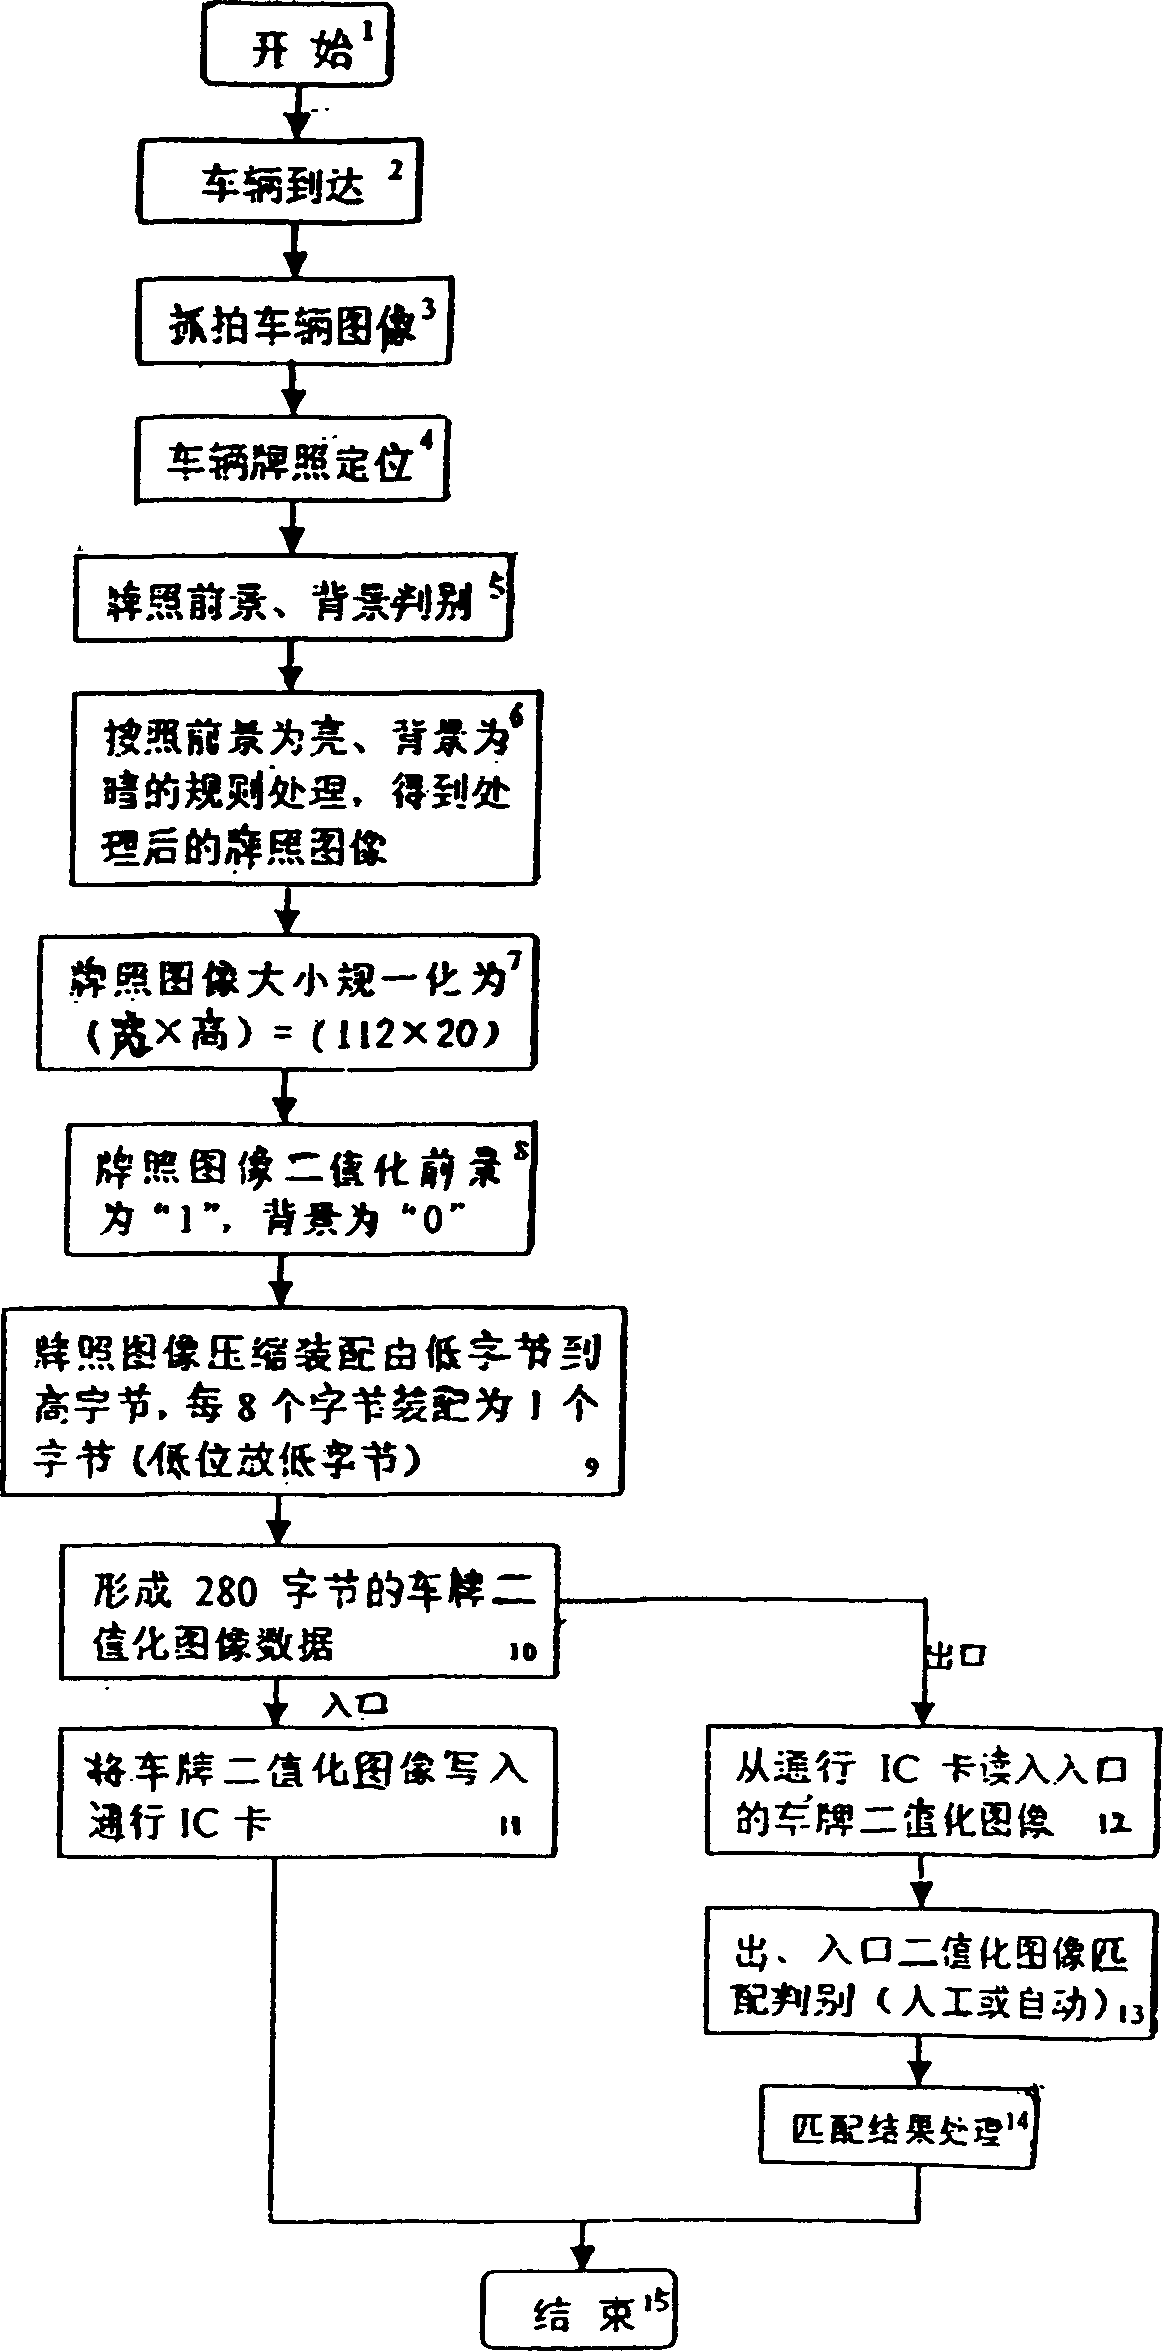 Application method for badging image in expressway toll system